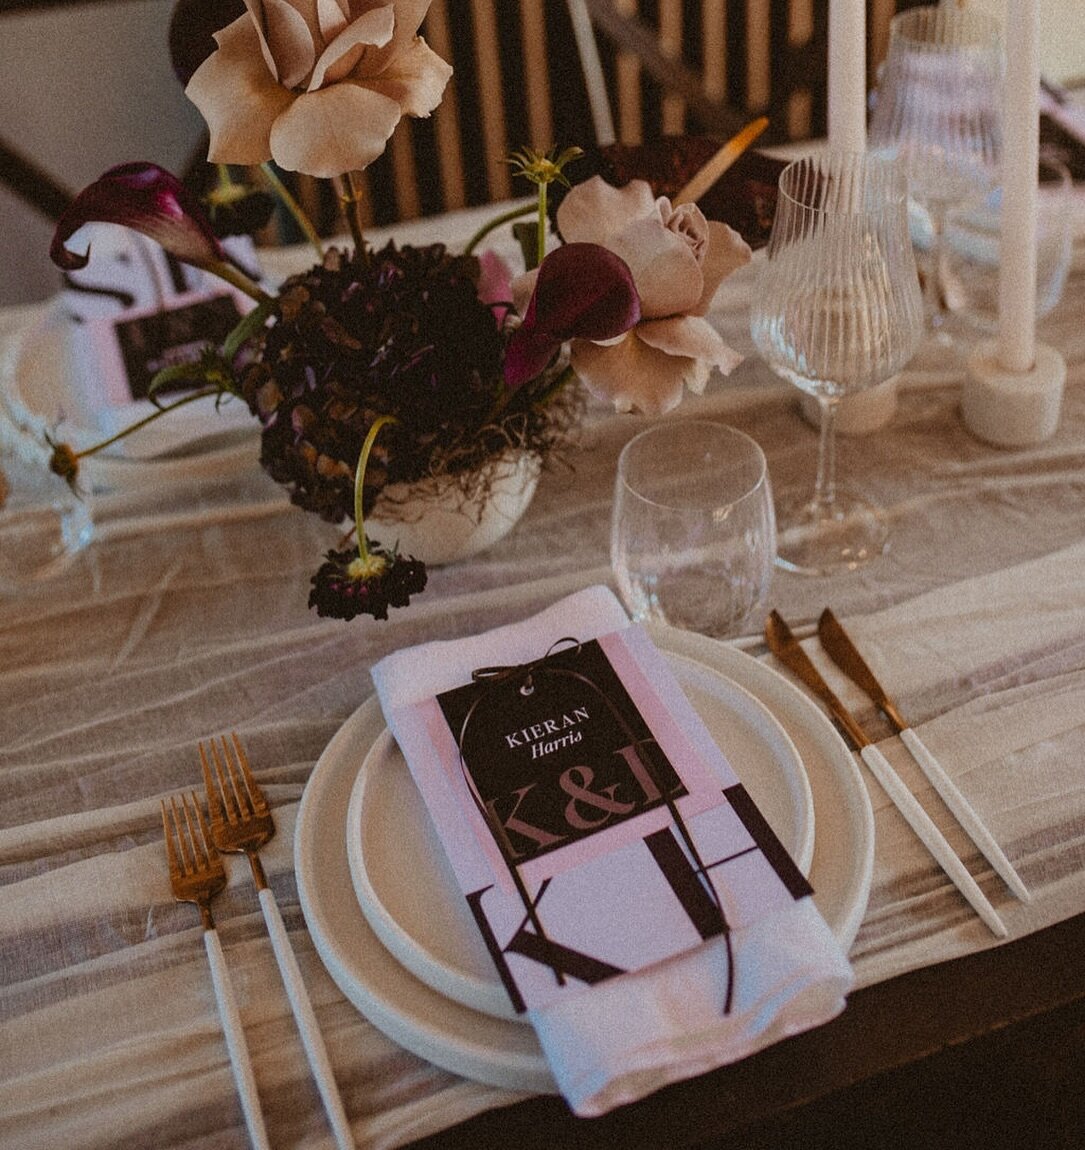 Want to elevate your place settings, then why not go for a layered design, playing with colour and texture 🎀 

Styling + Signage: @synchedevents 
Photography: @camillaandreaphotography
Venue: @voewoodweddings
Flowers: @floralsistas
Tableware: @banqu